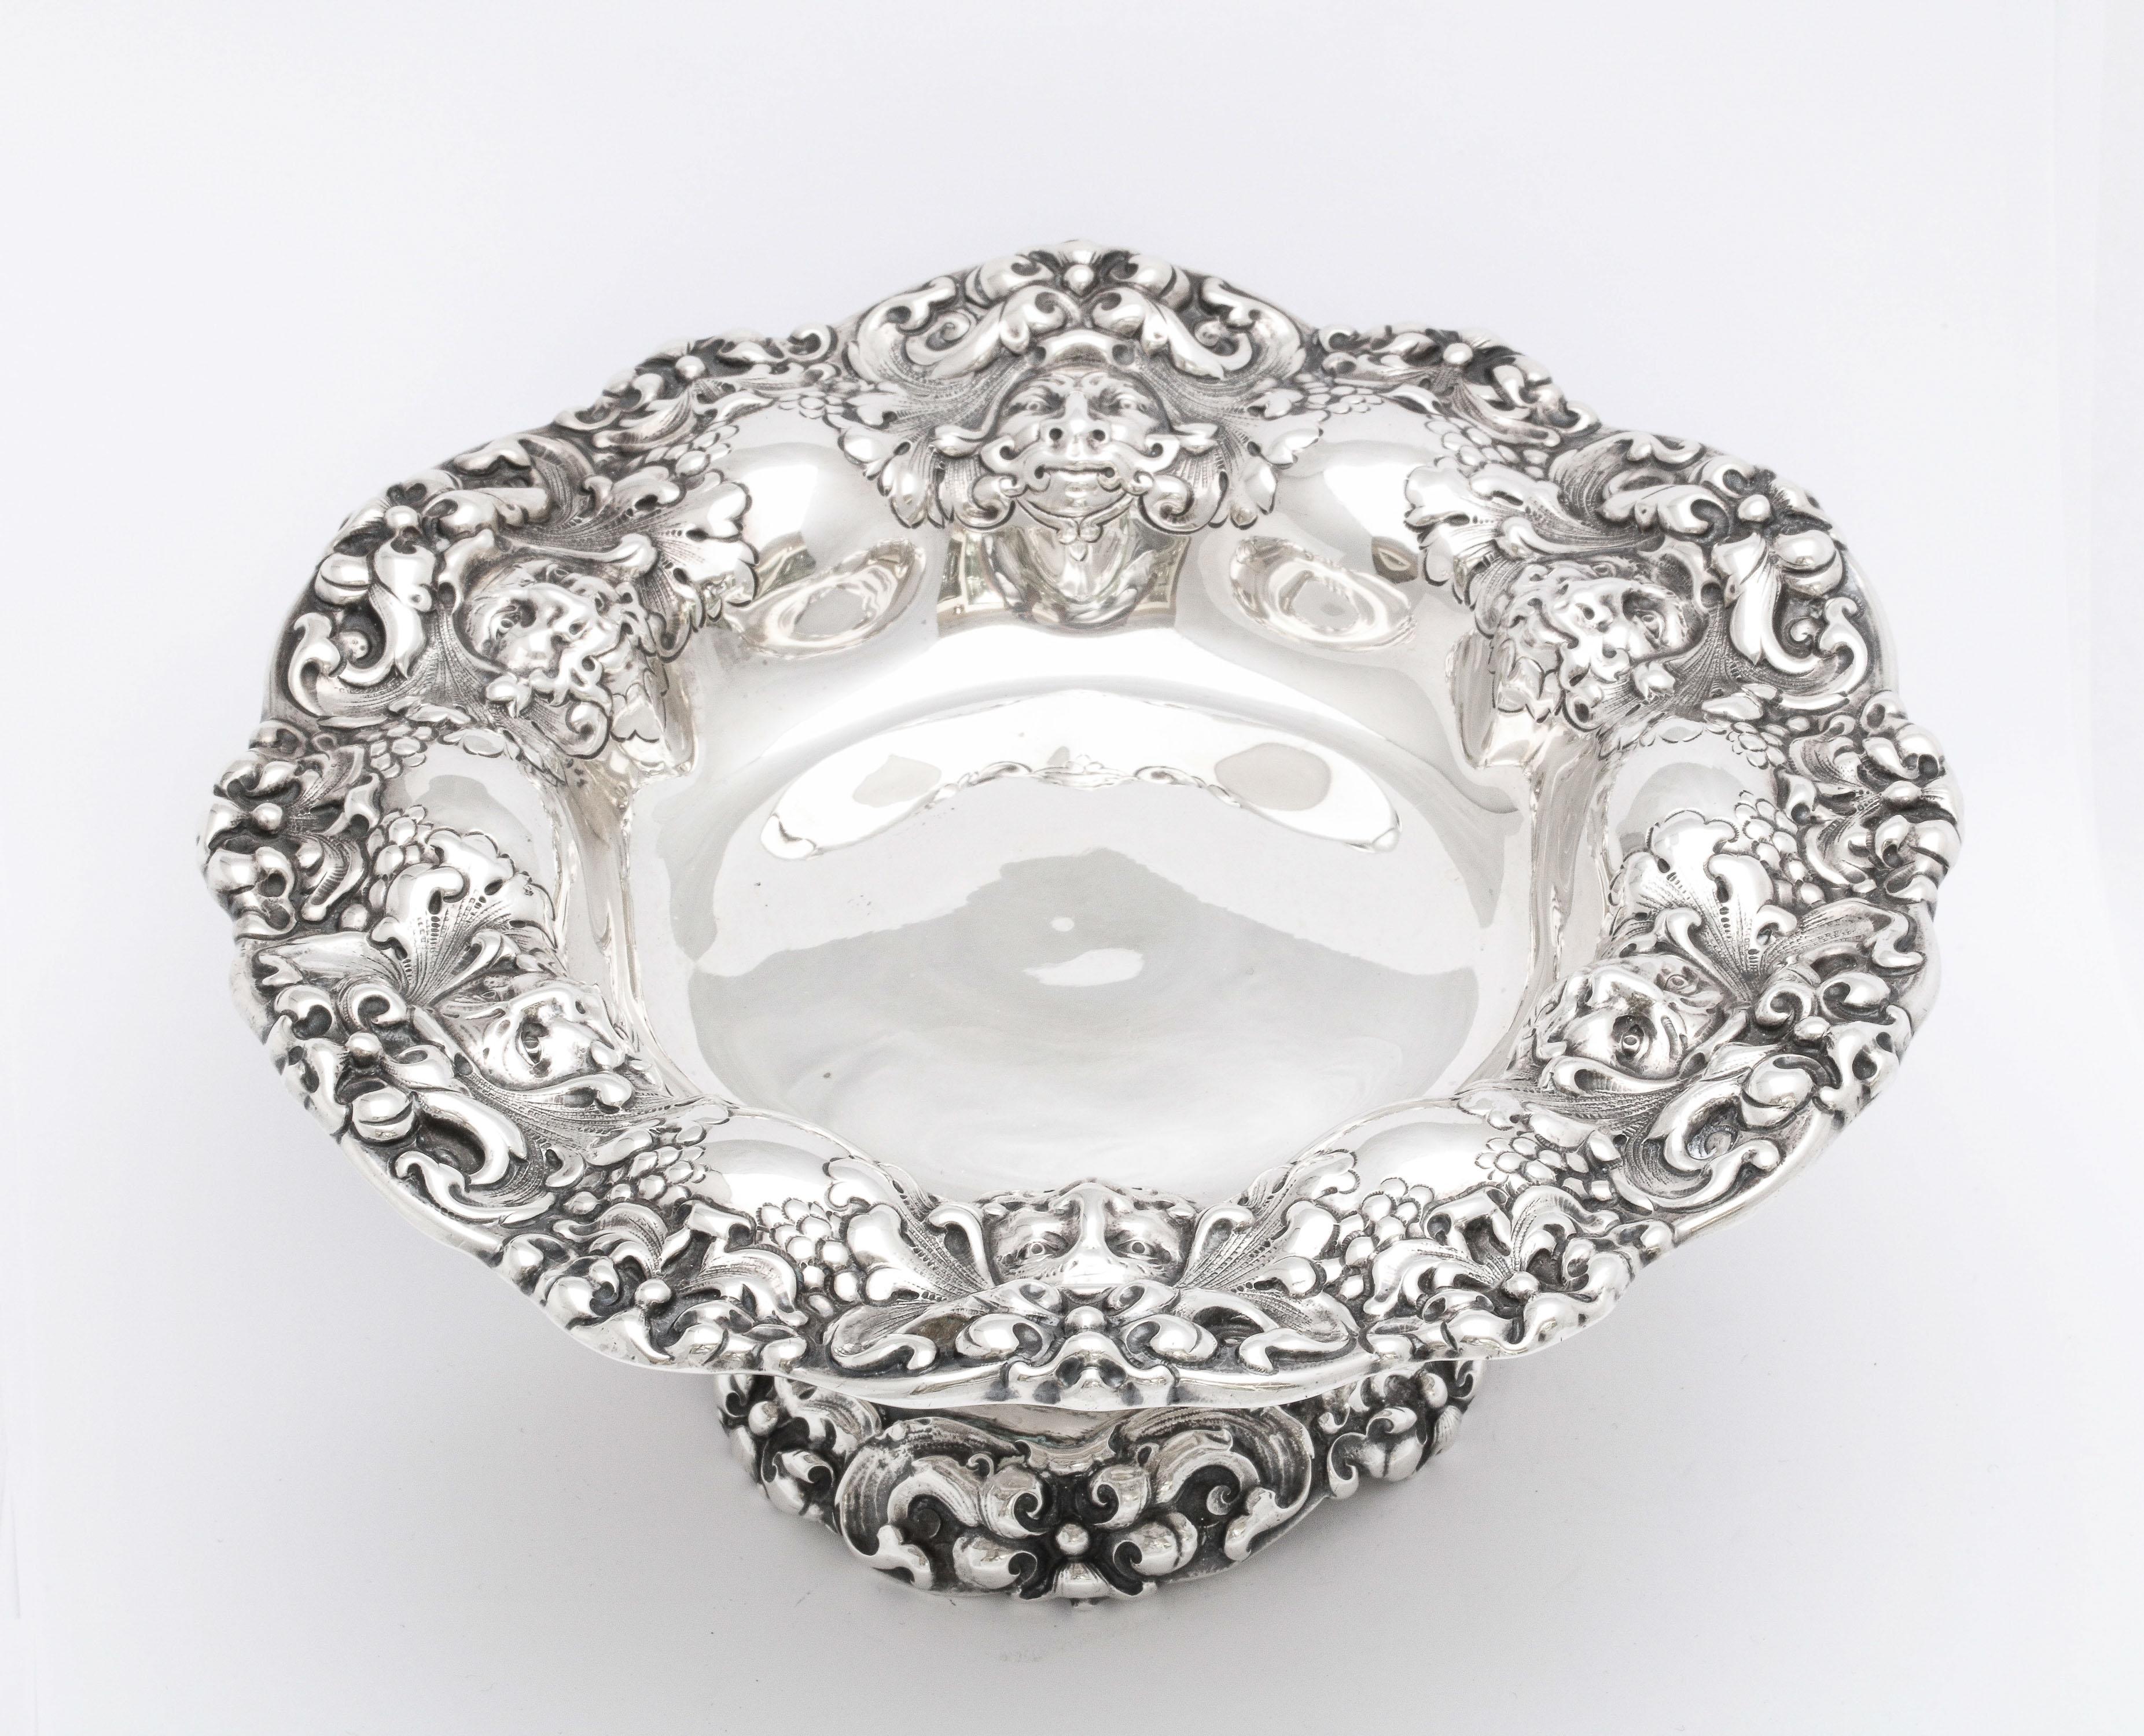 Neoclassical Style, Victorian Period Sterling Silver Tazza by Gorham For Sale 3